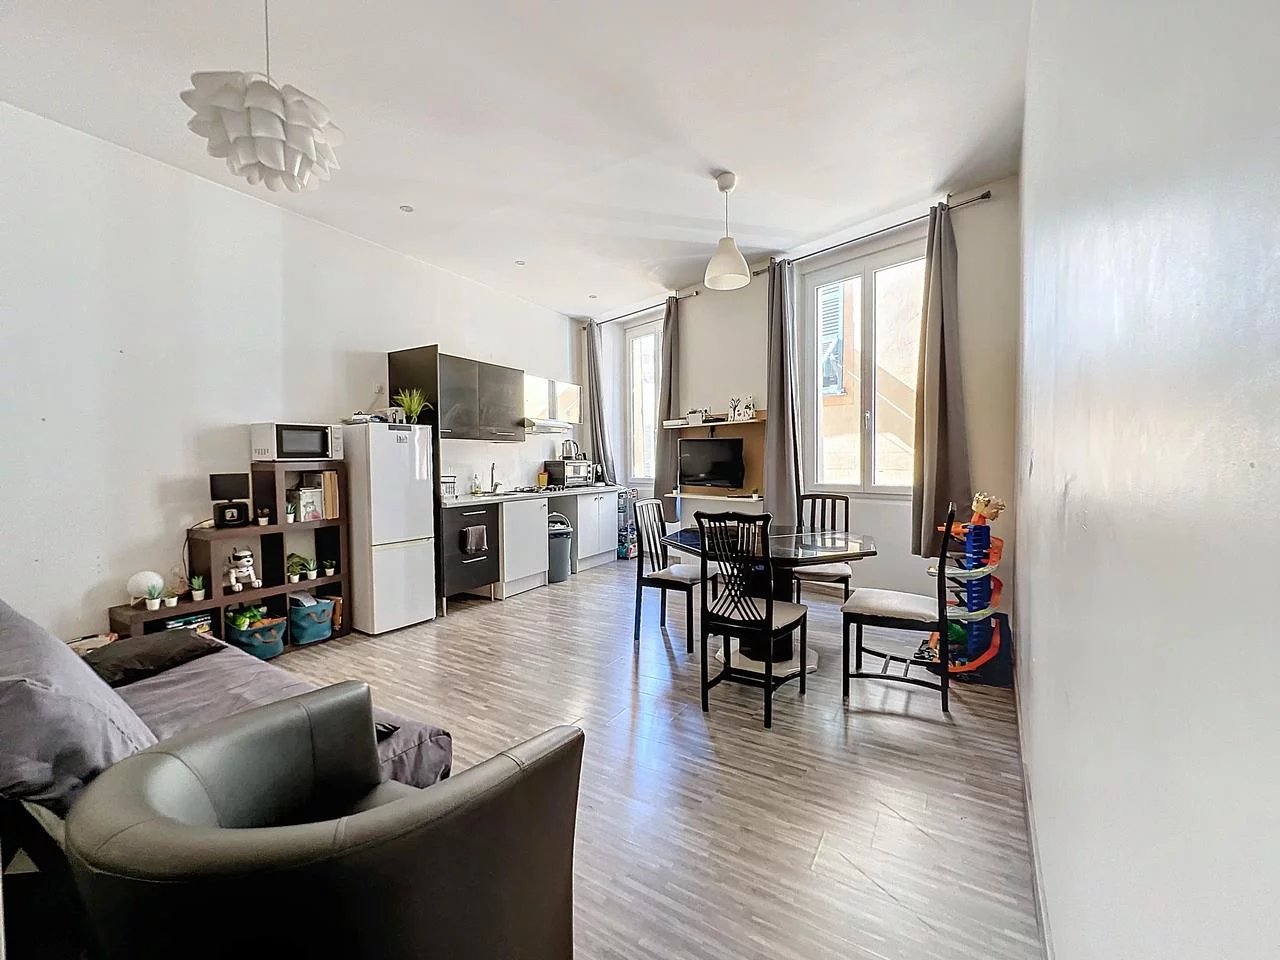 Appartement  3 Rooms 53.74m2  for sale   325 000 €